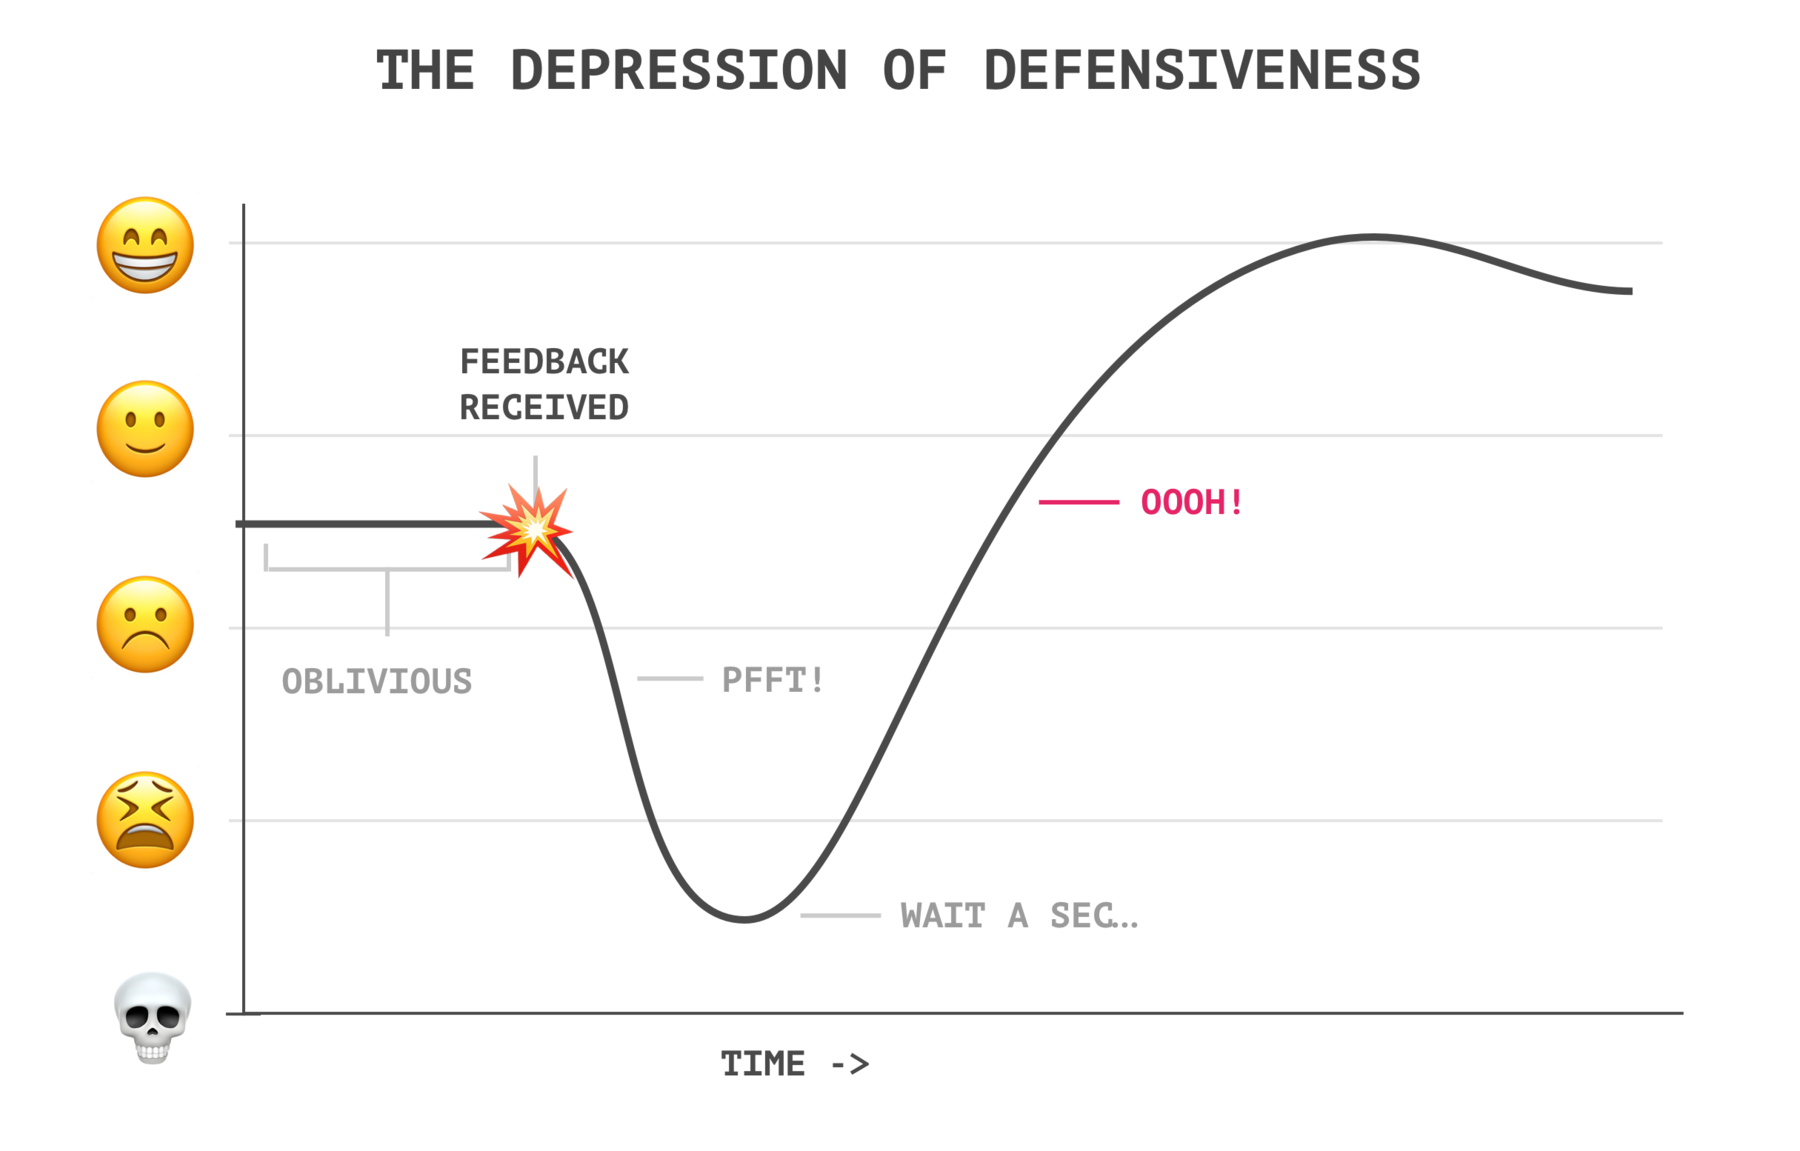 THE DEPRESSION OF DEFENSIVENESS chart with the a slow rise labelled ‘Oooh!’